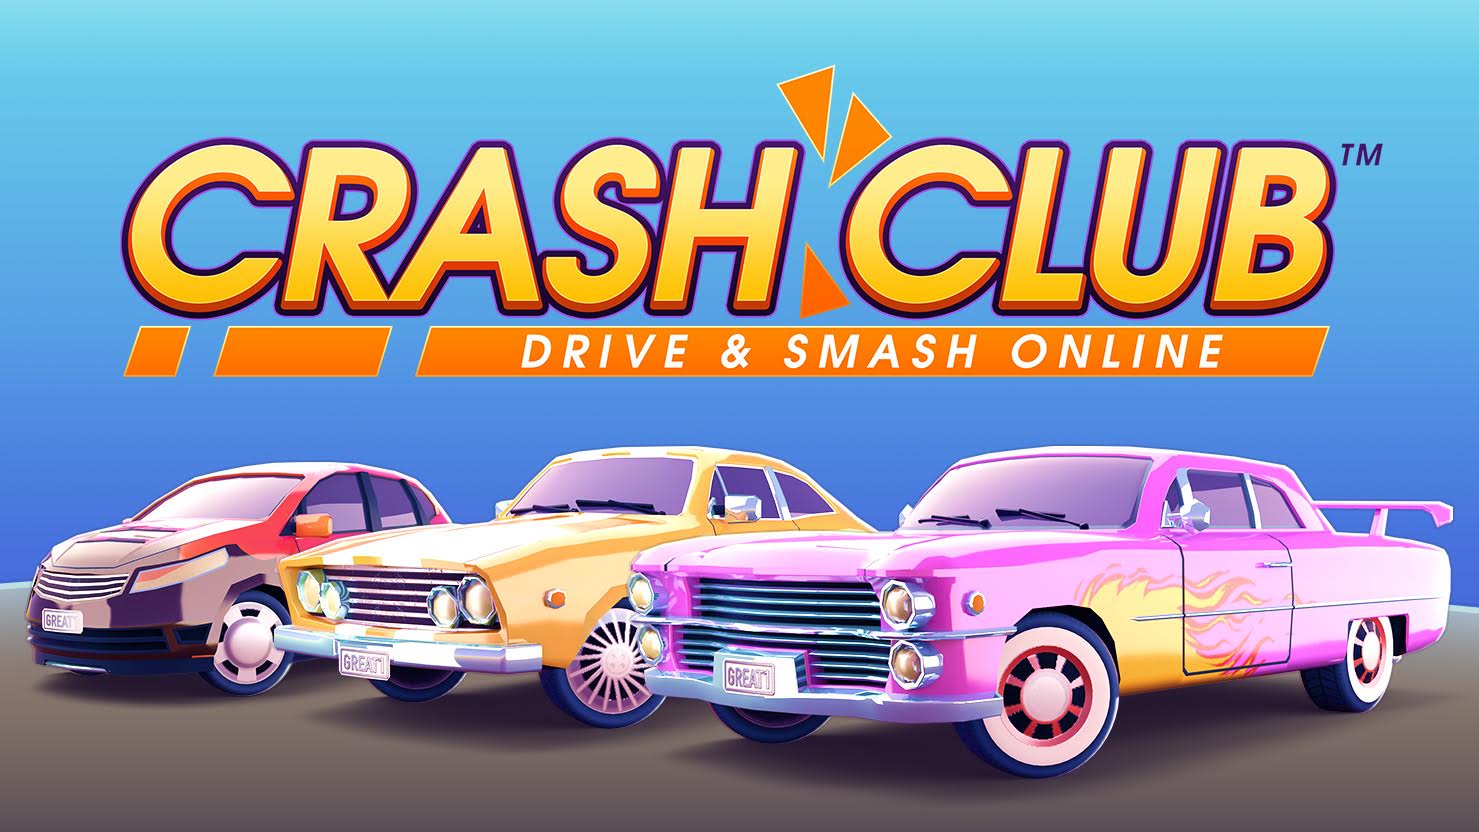 Prettygreat Announce Online Driving Combat Game 'Crash Club', and Are Looking for Beta Testers